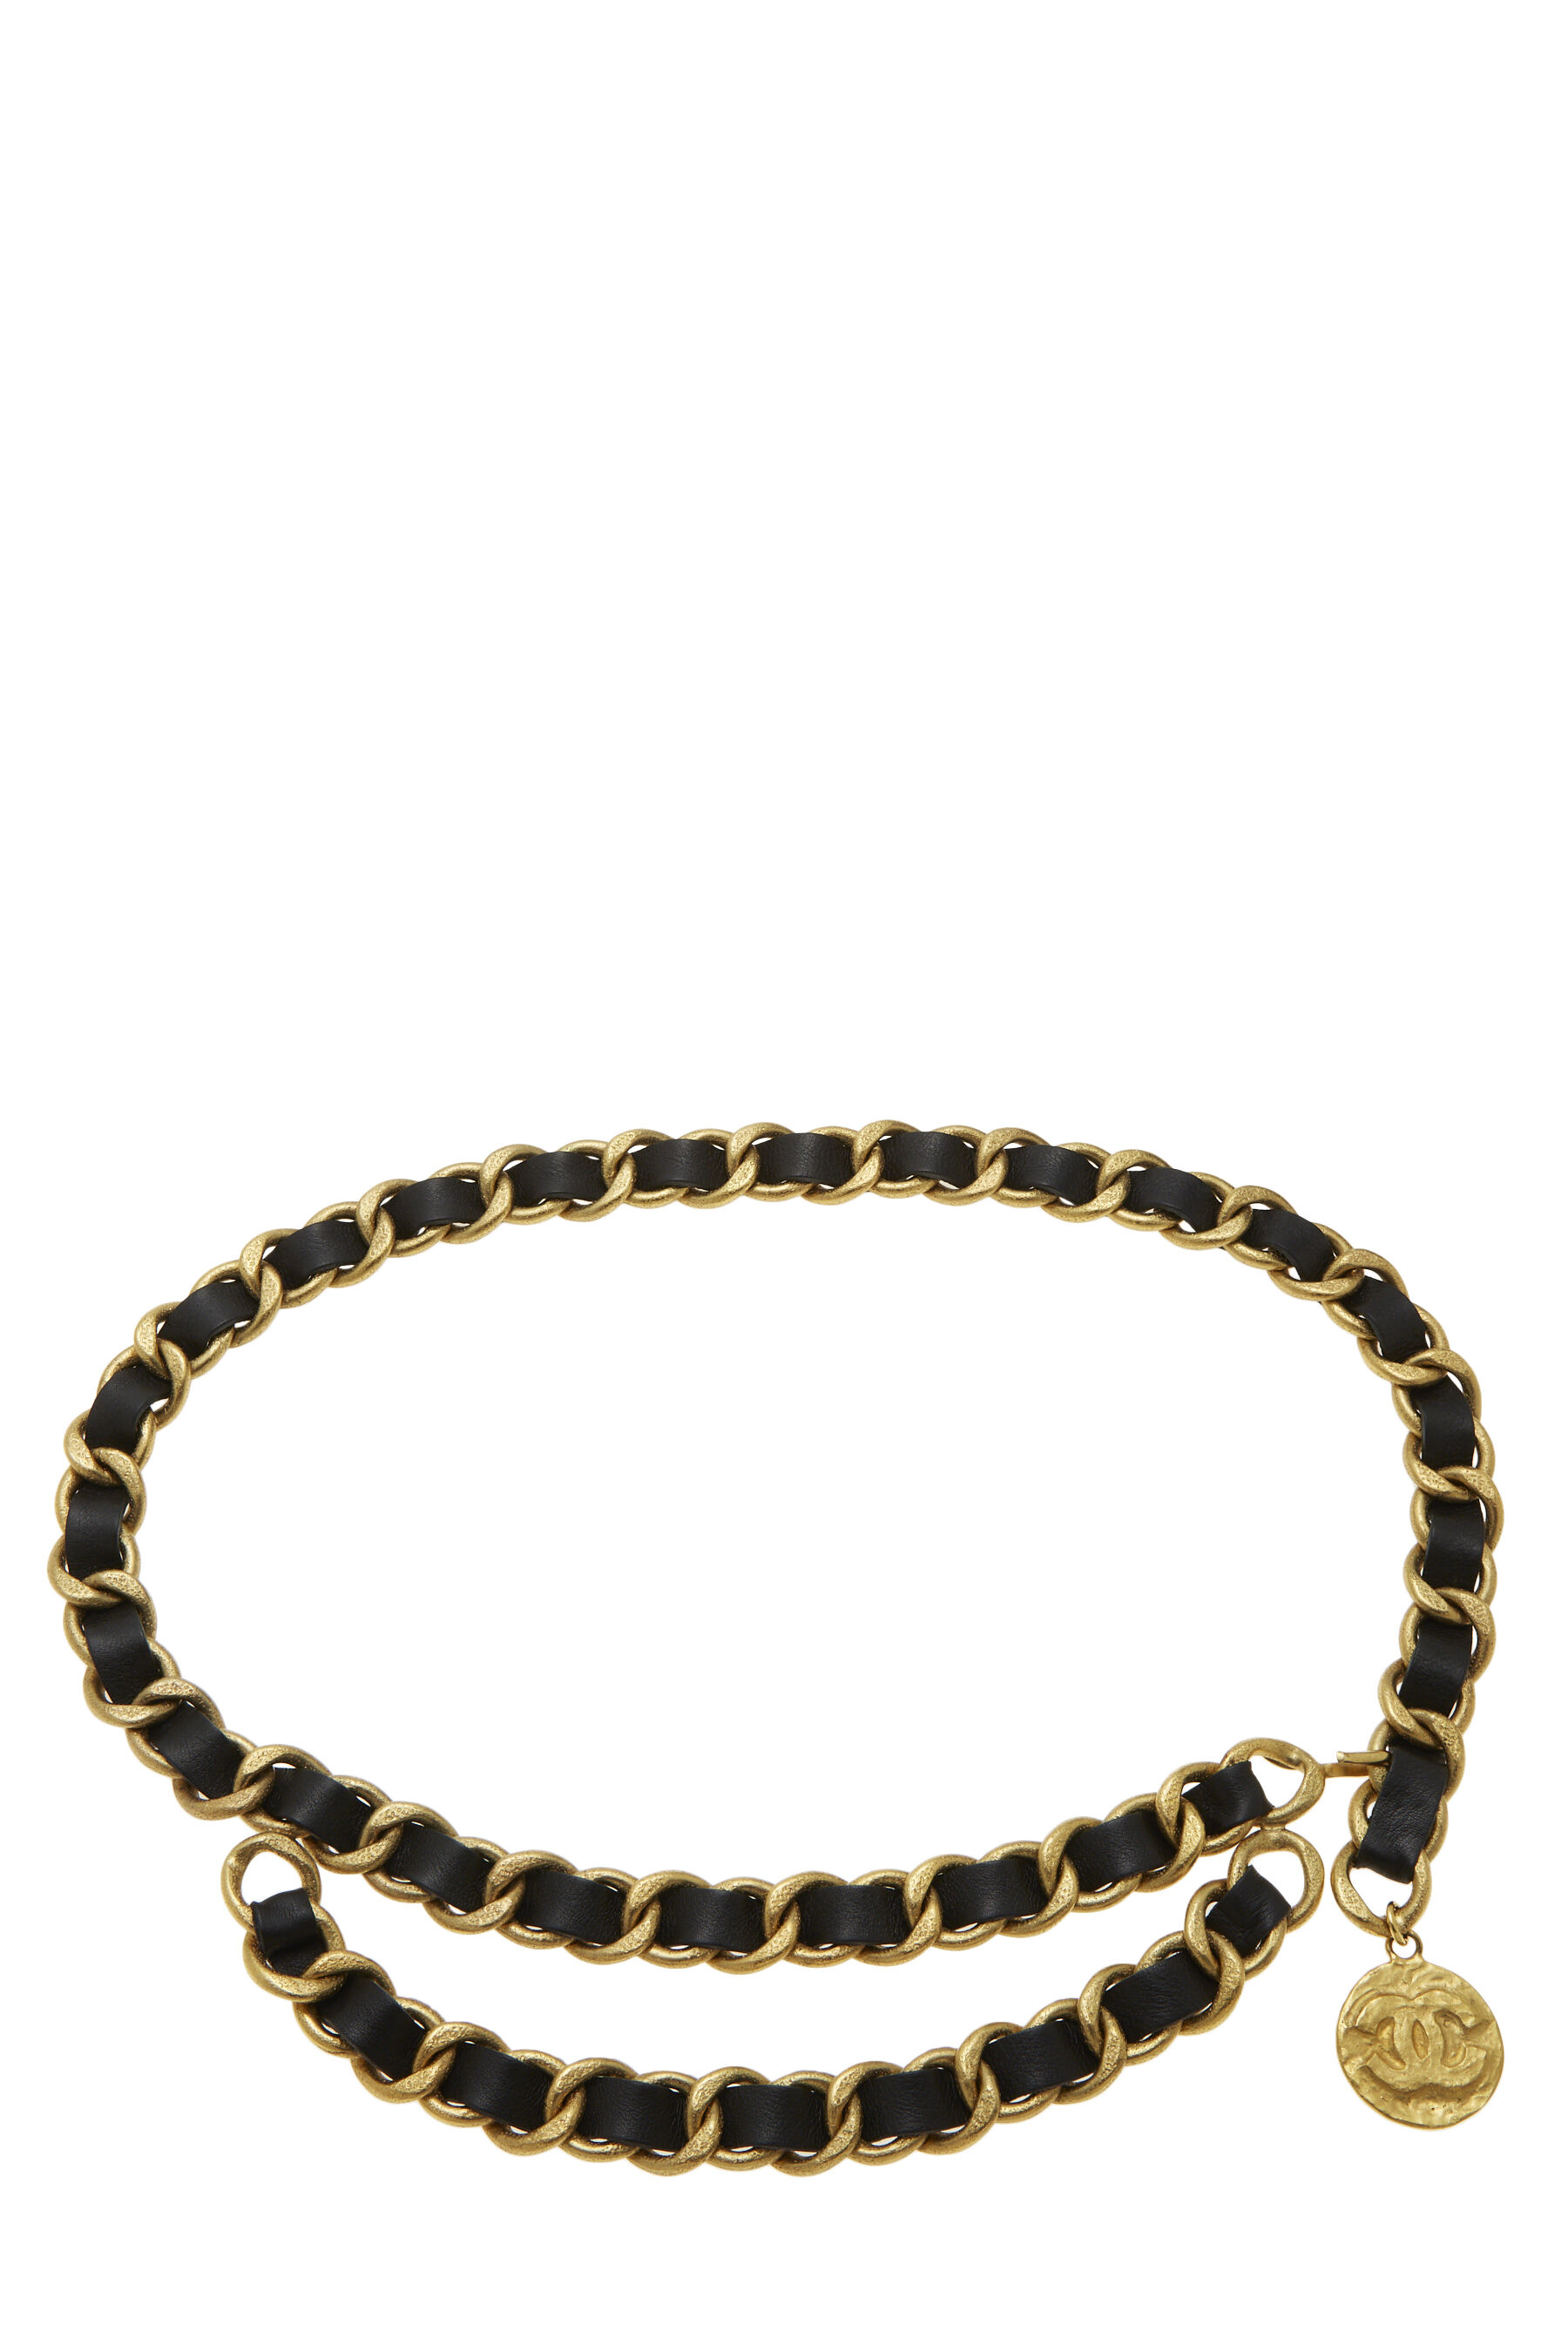 Chanel Gold & Black Leather Chain Belt 2 Q6AABW17KB021